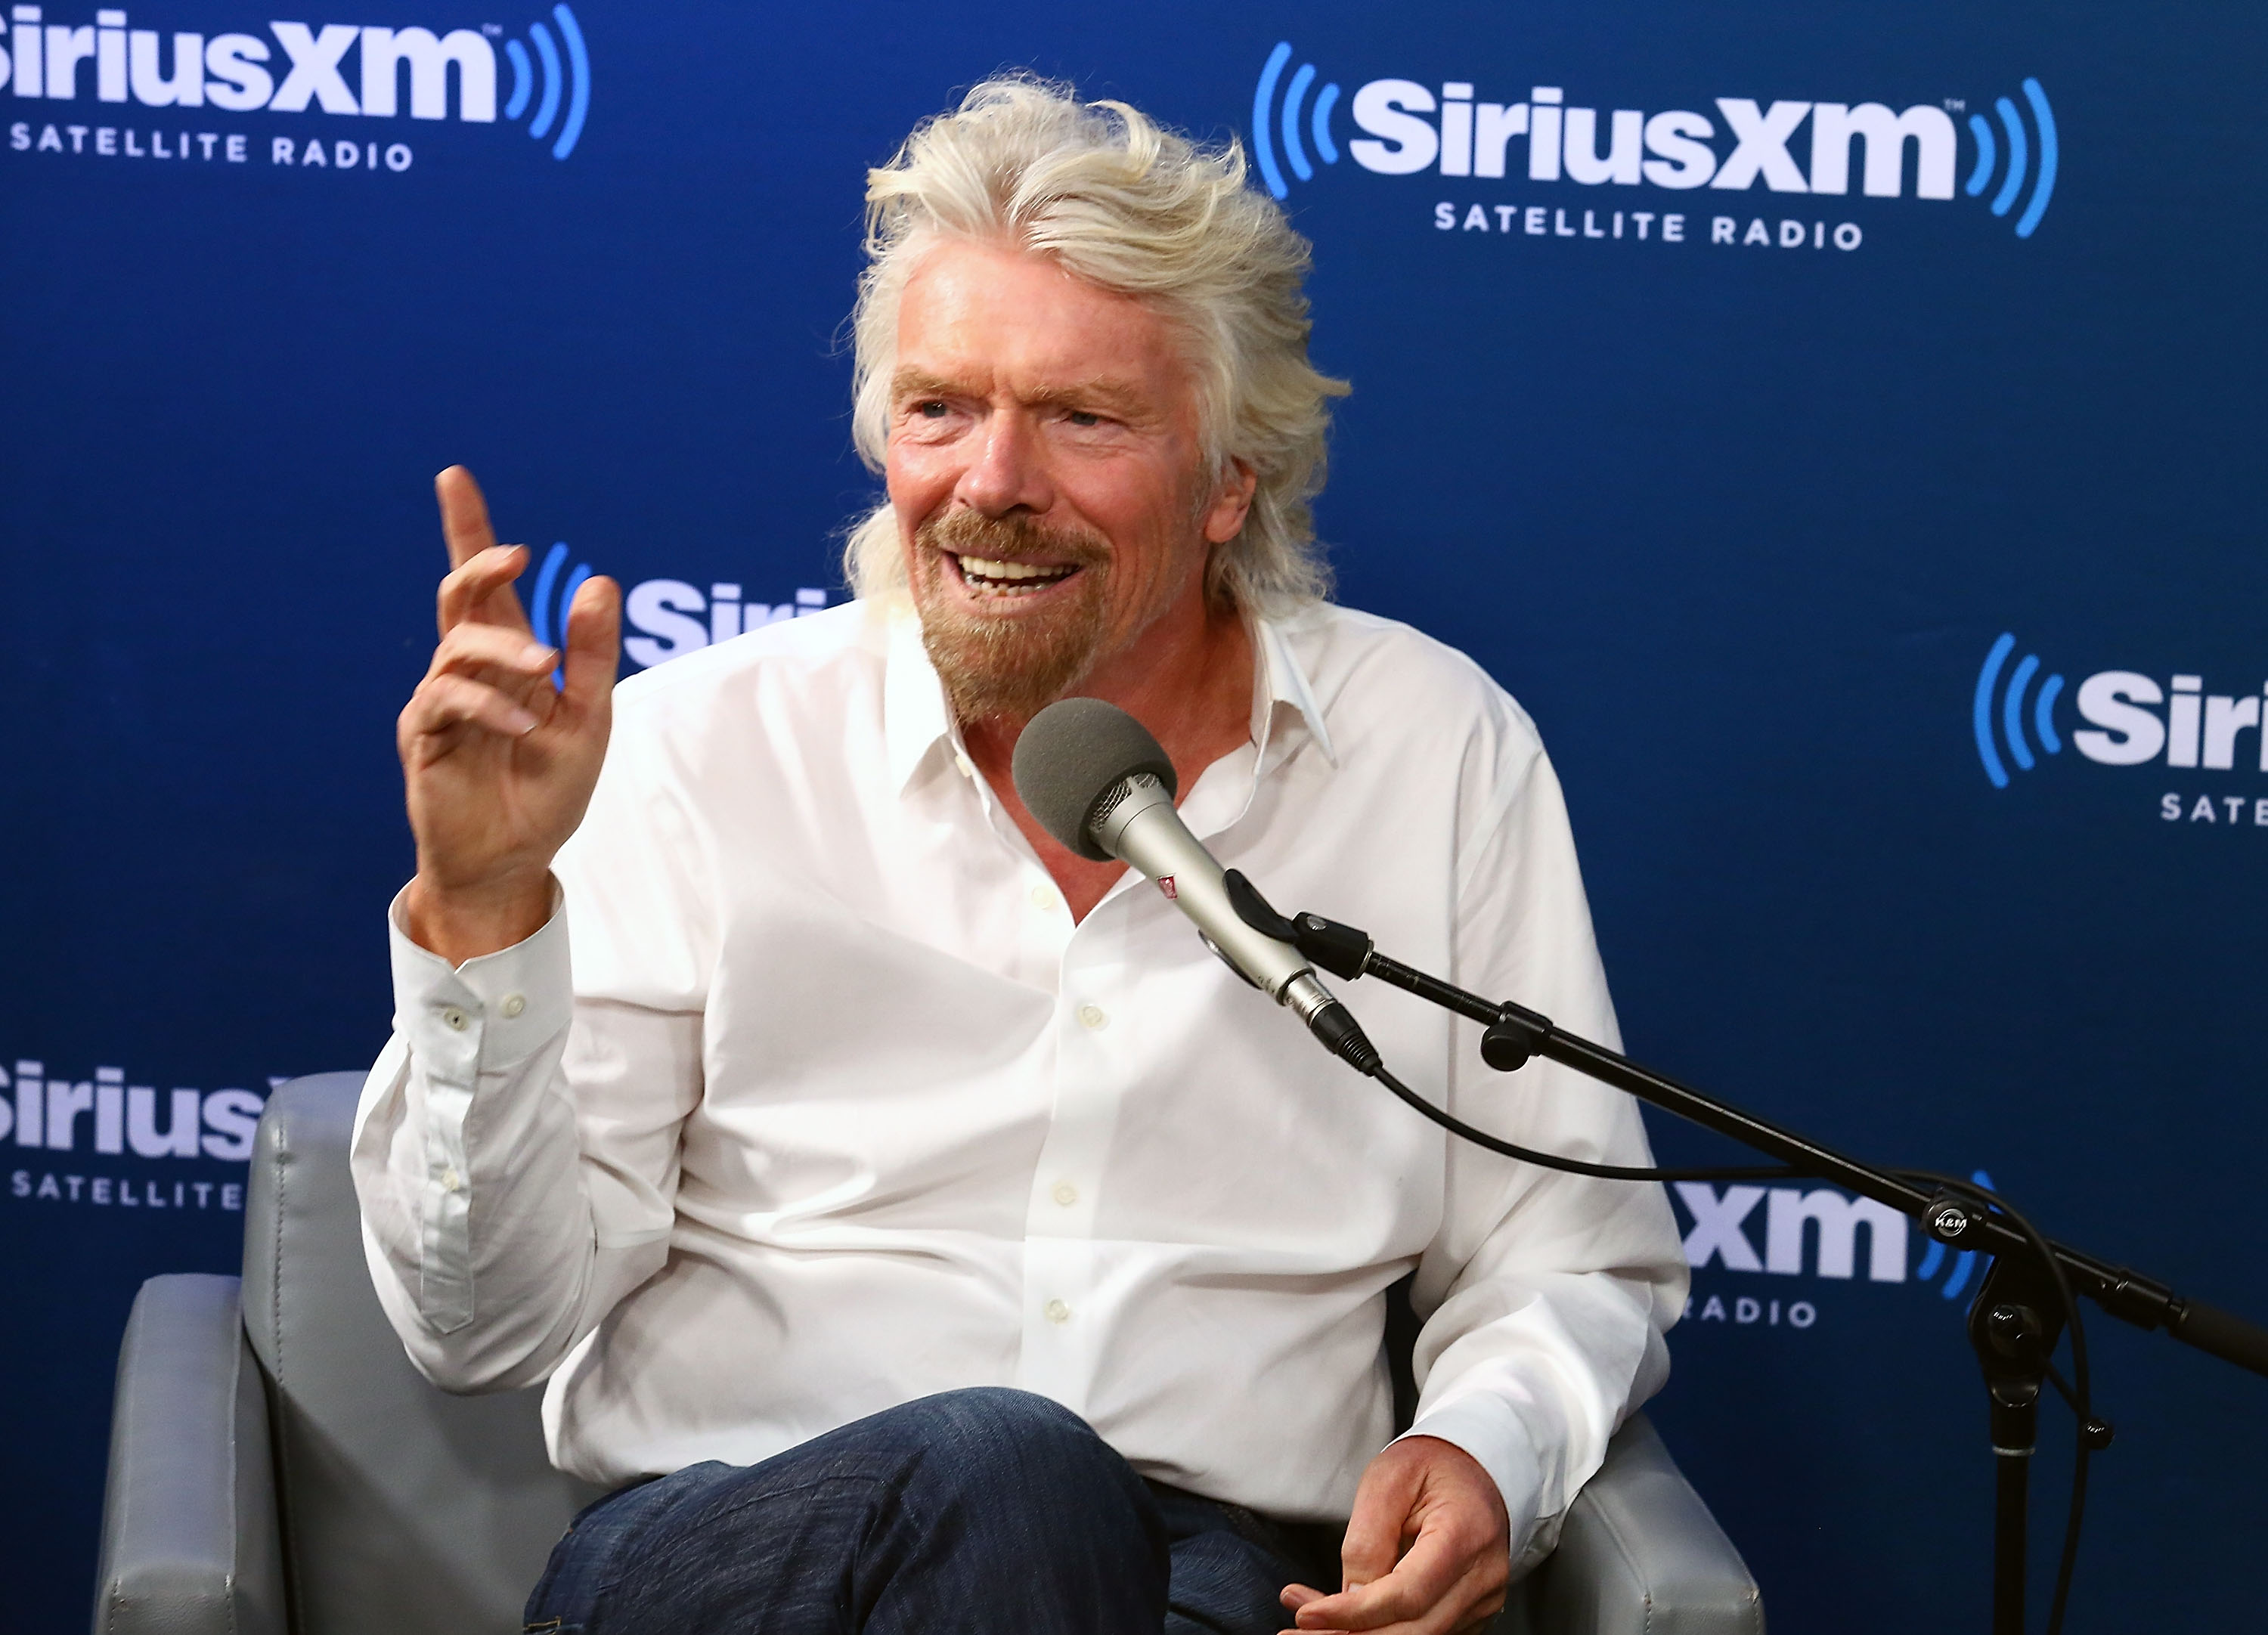 Richard Branson's One Piece of Advice for Keeping a New Year's Resolution